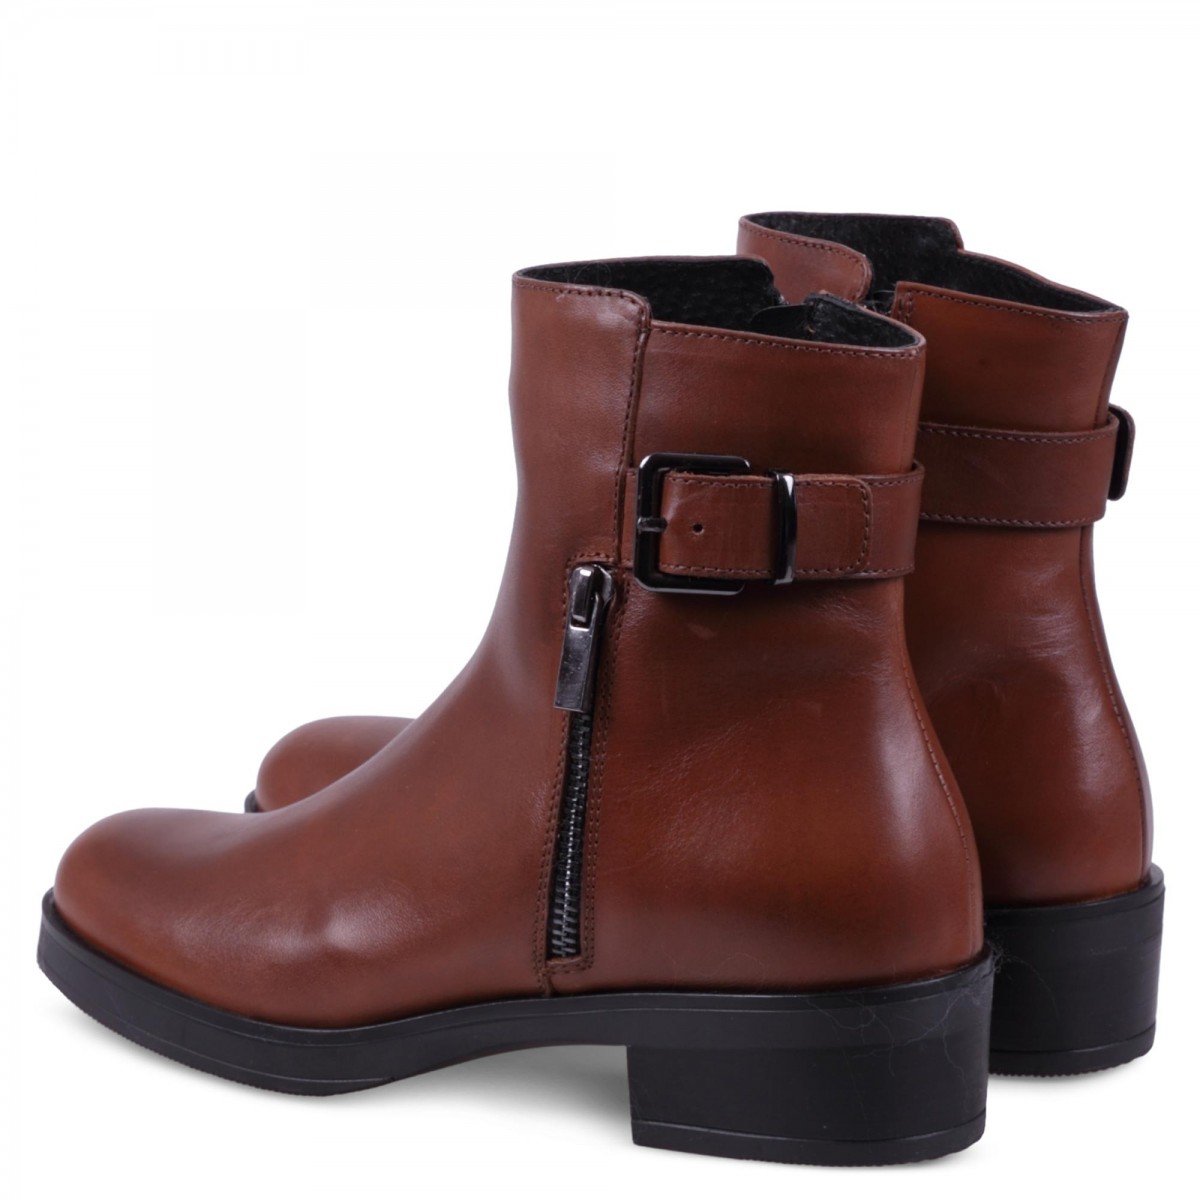 WOMEN'S ANKLE BOOT 2362